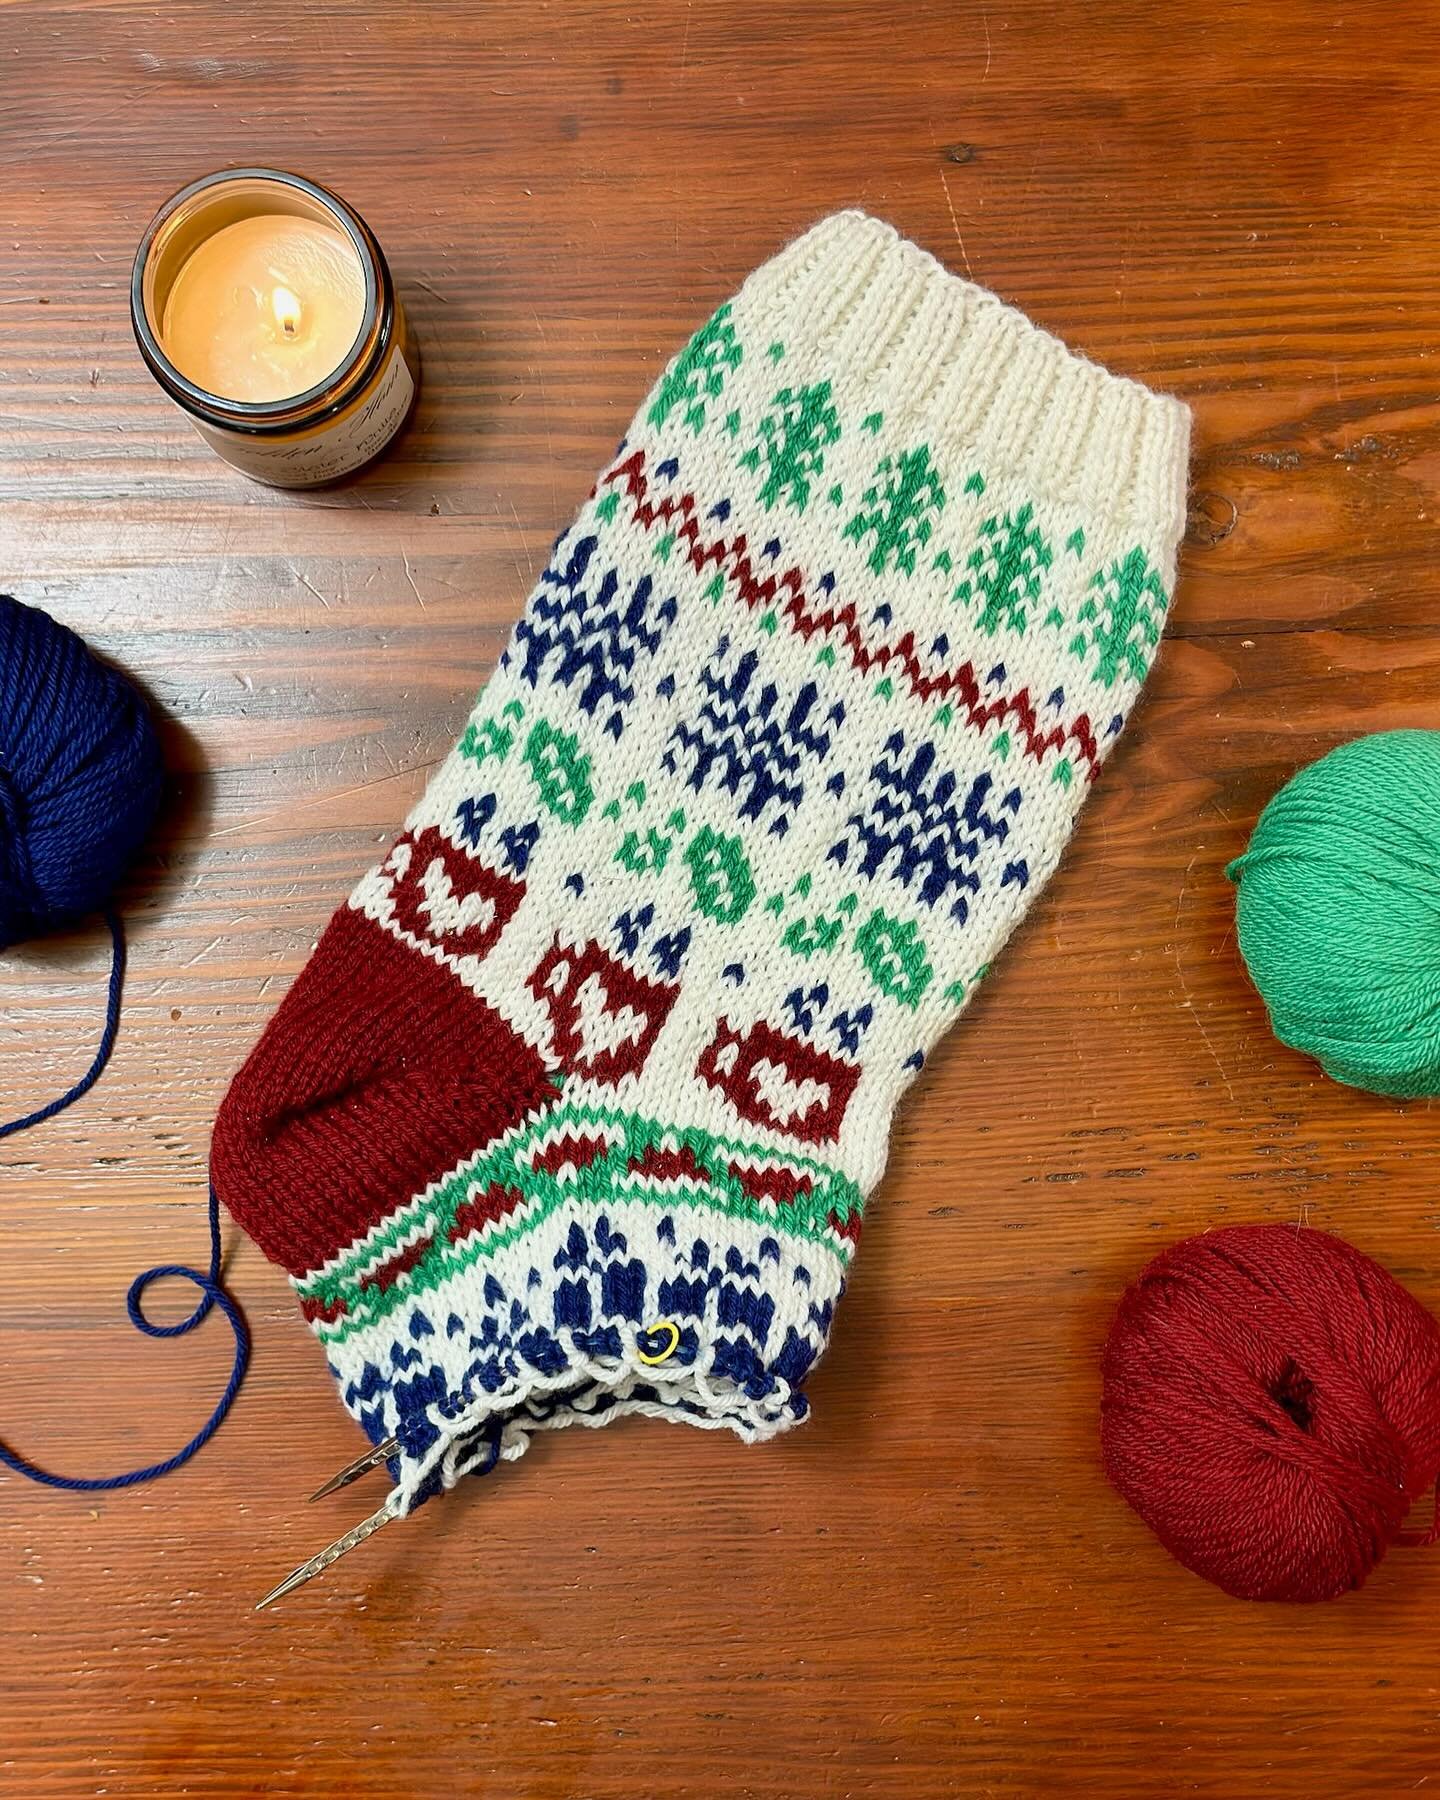 This is happening in July. A KAL with @hubbardjenny  #christmasinjuly  #christmas  #doers #makers #signup #wool #handmade #handwork #byhand #slowfashion  #colorwork  #colorworkknitting  #craft #create #lys #fortcollins #lovetoknit  #learntoknit